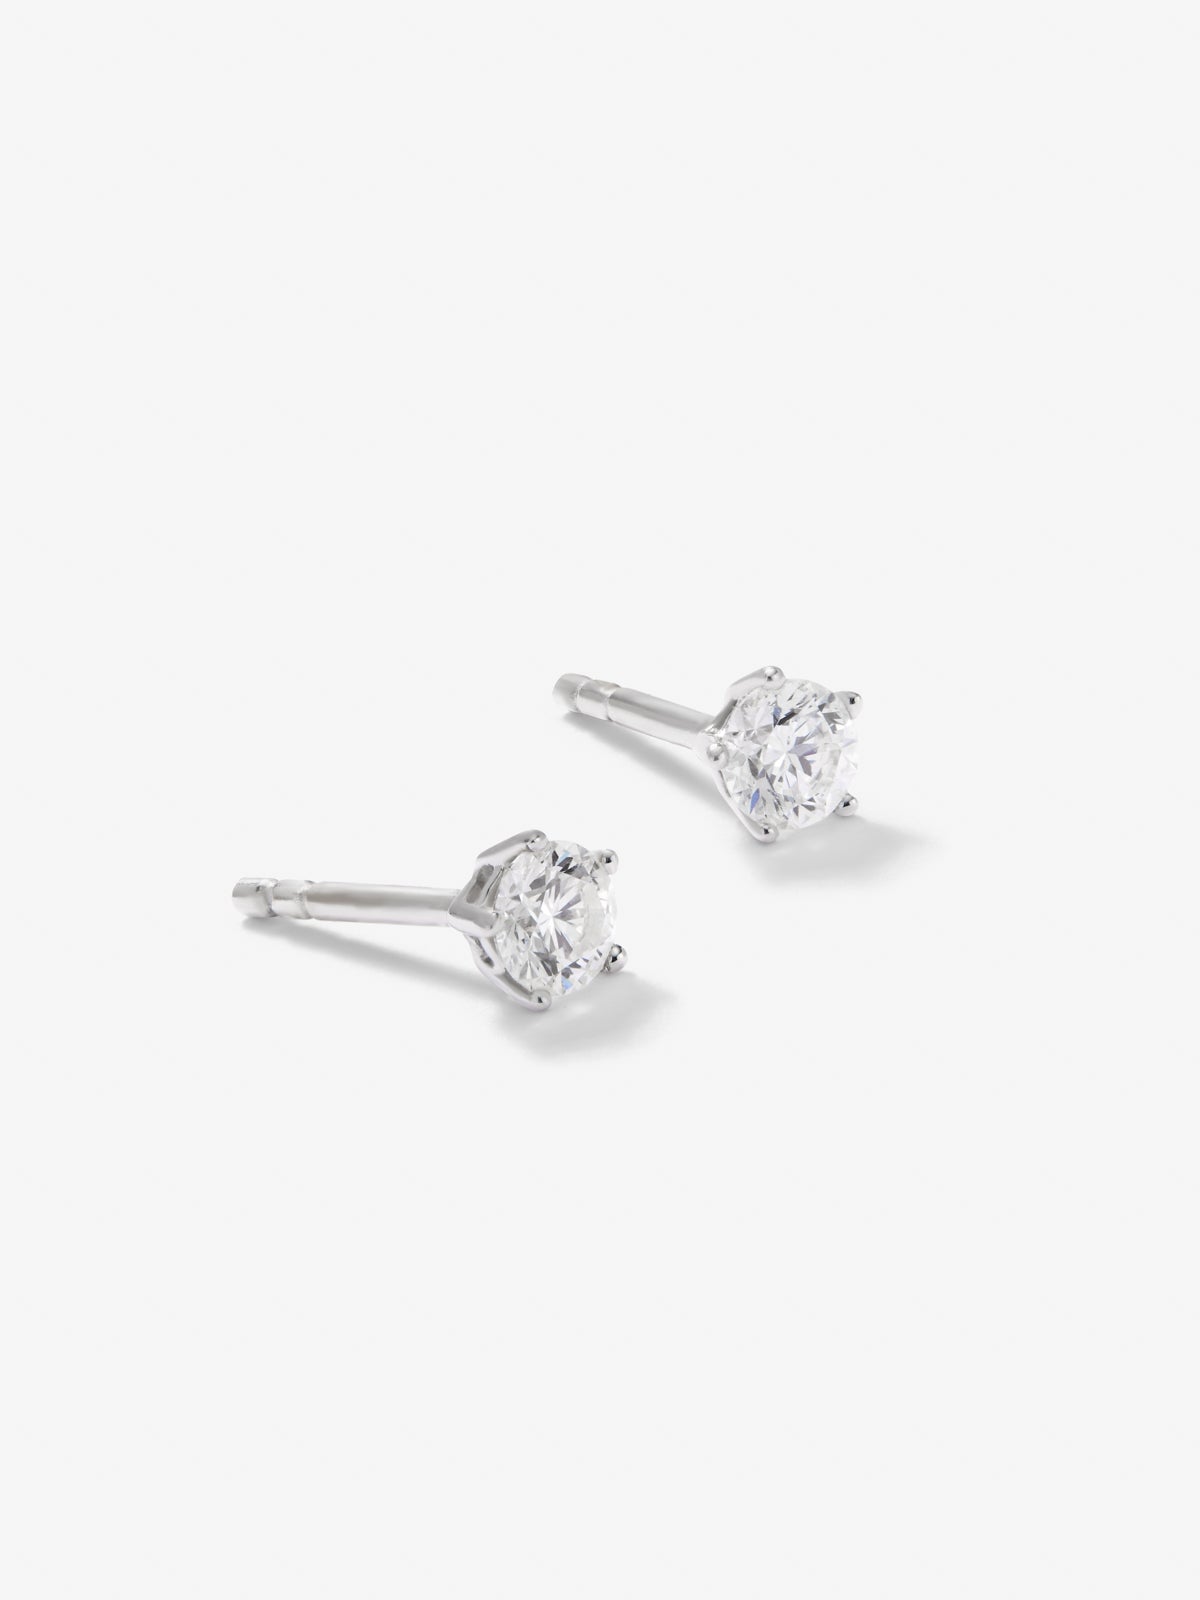 18K white gold solitaire earrings with 2 brilliant-cut diamonds with a total of 0.4 cts